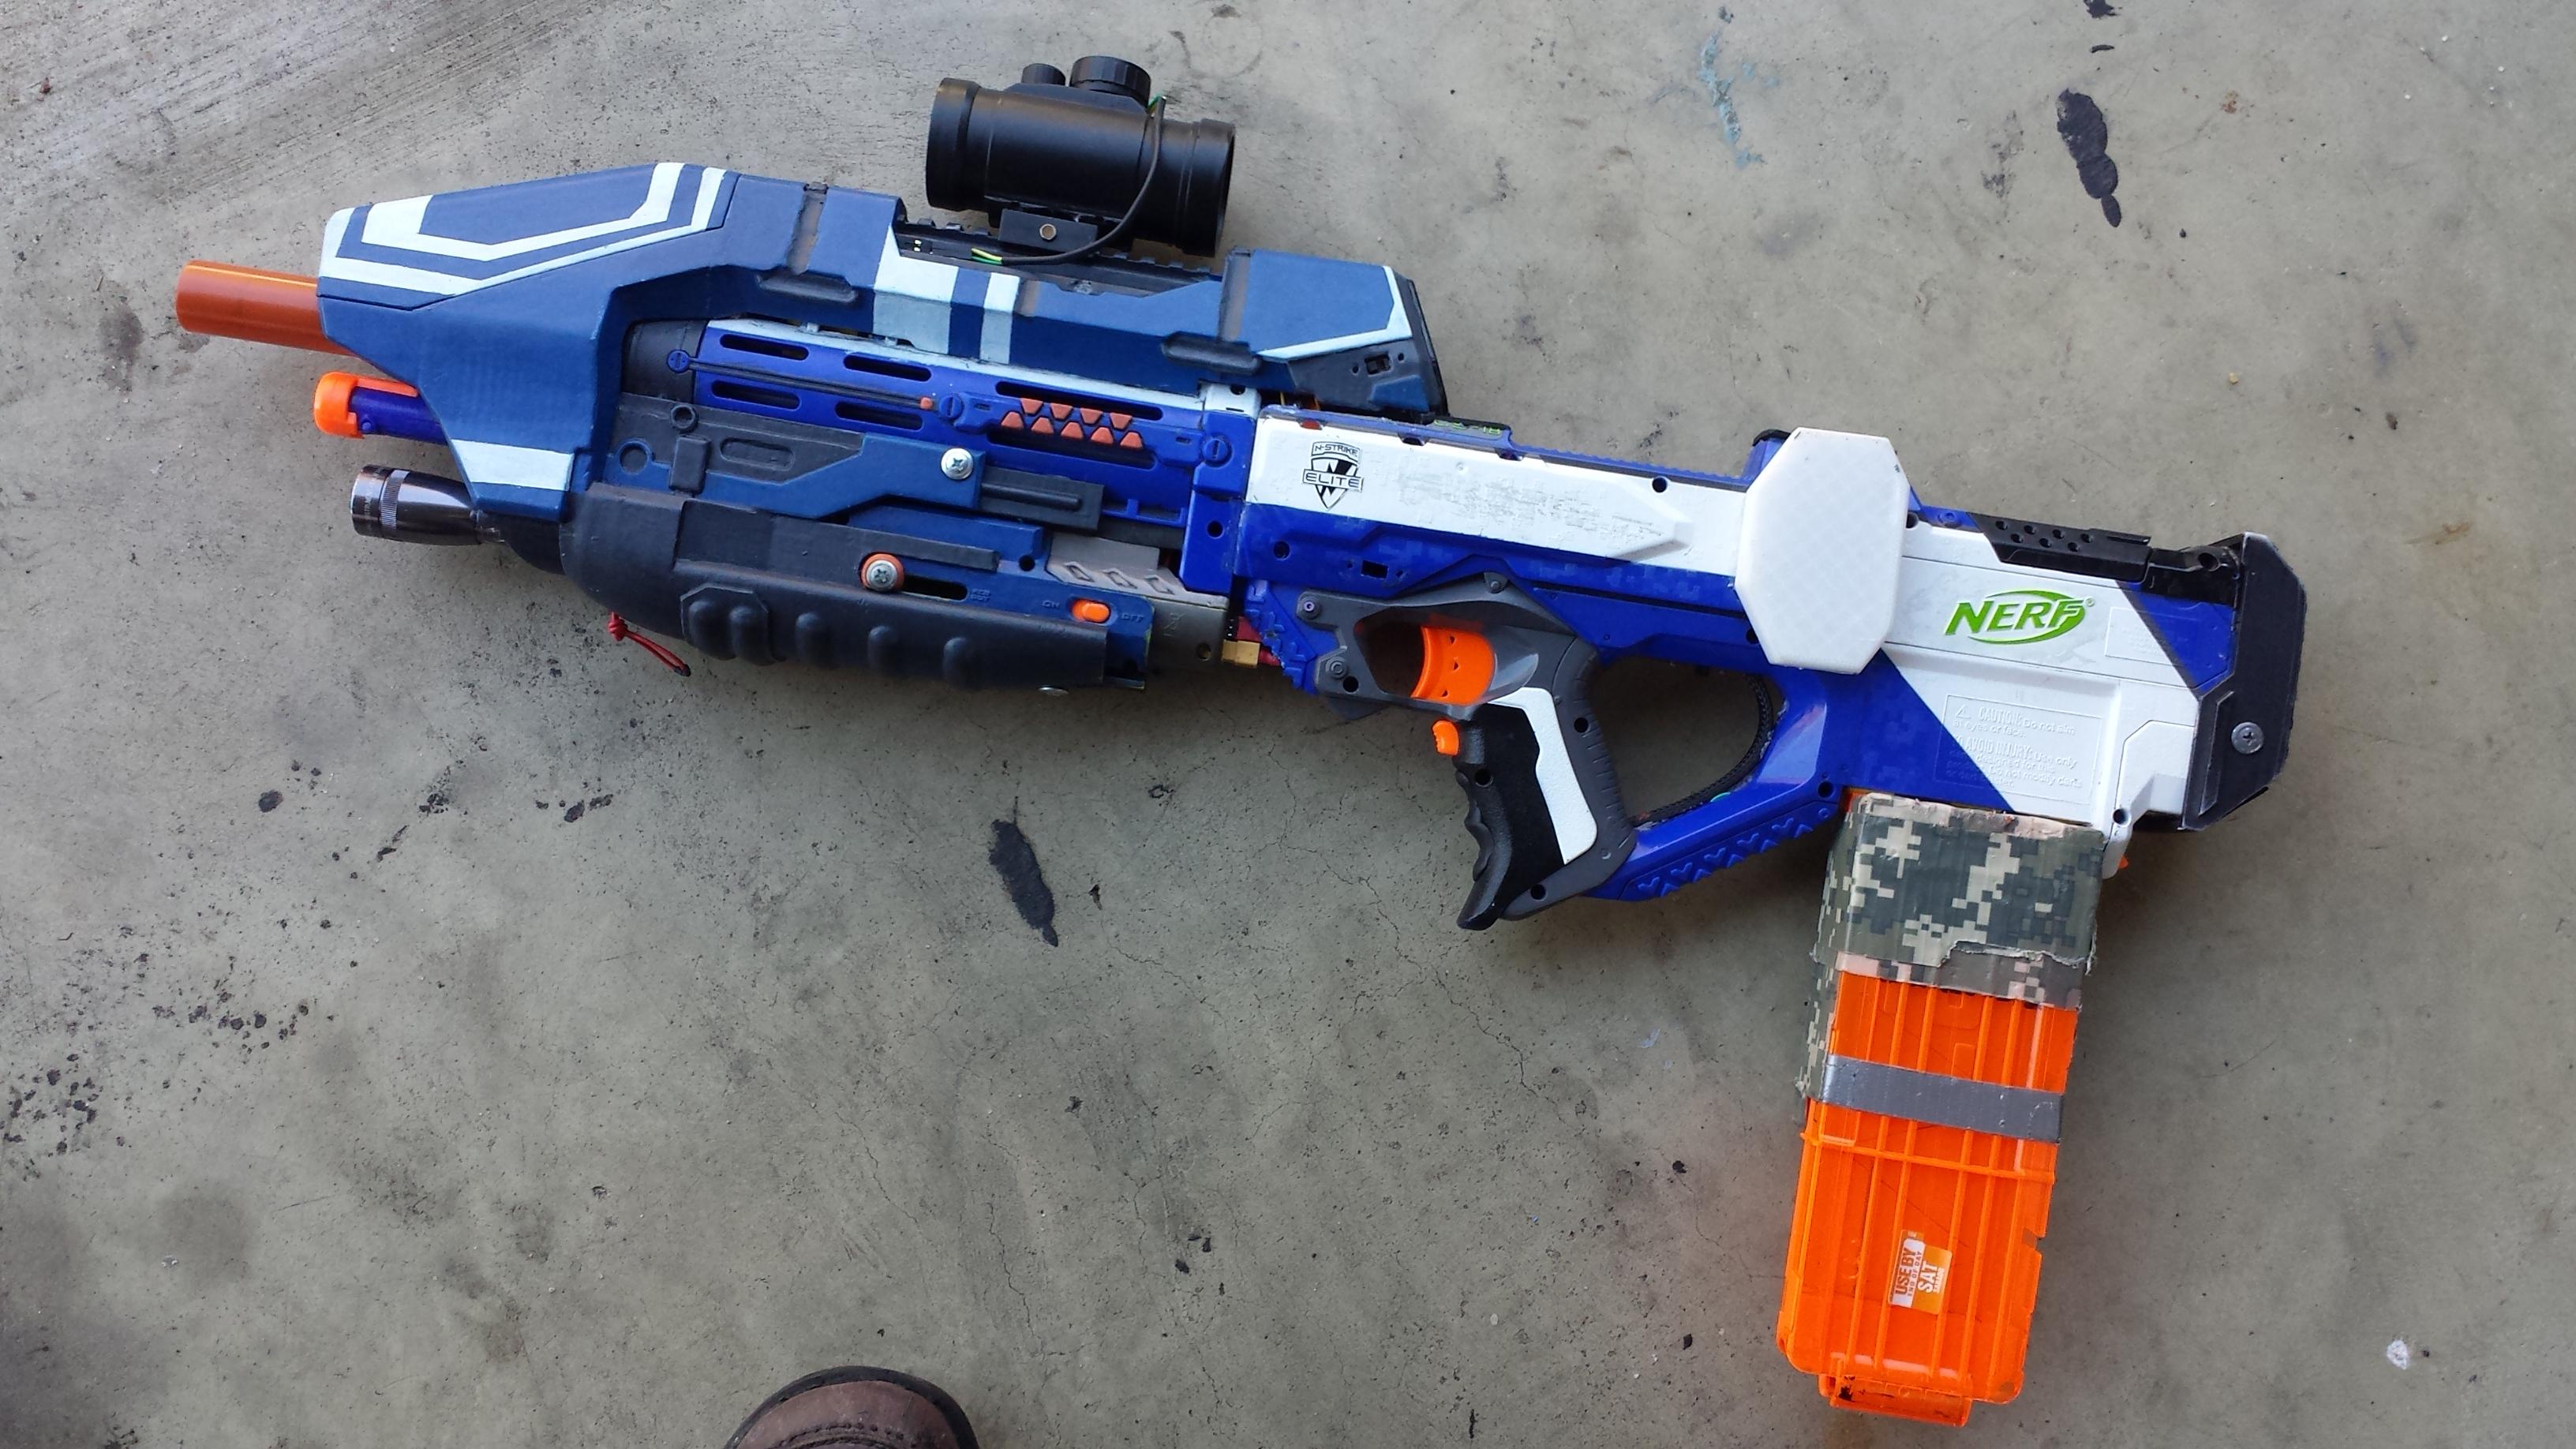 3D Printed Nerf Halo Assault Takes Humans vs. Zombies Game to a Whole New Level - 3DPrint.com | The Voice of 3D Printing / Additive Manufacturing